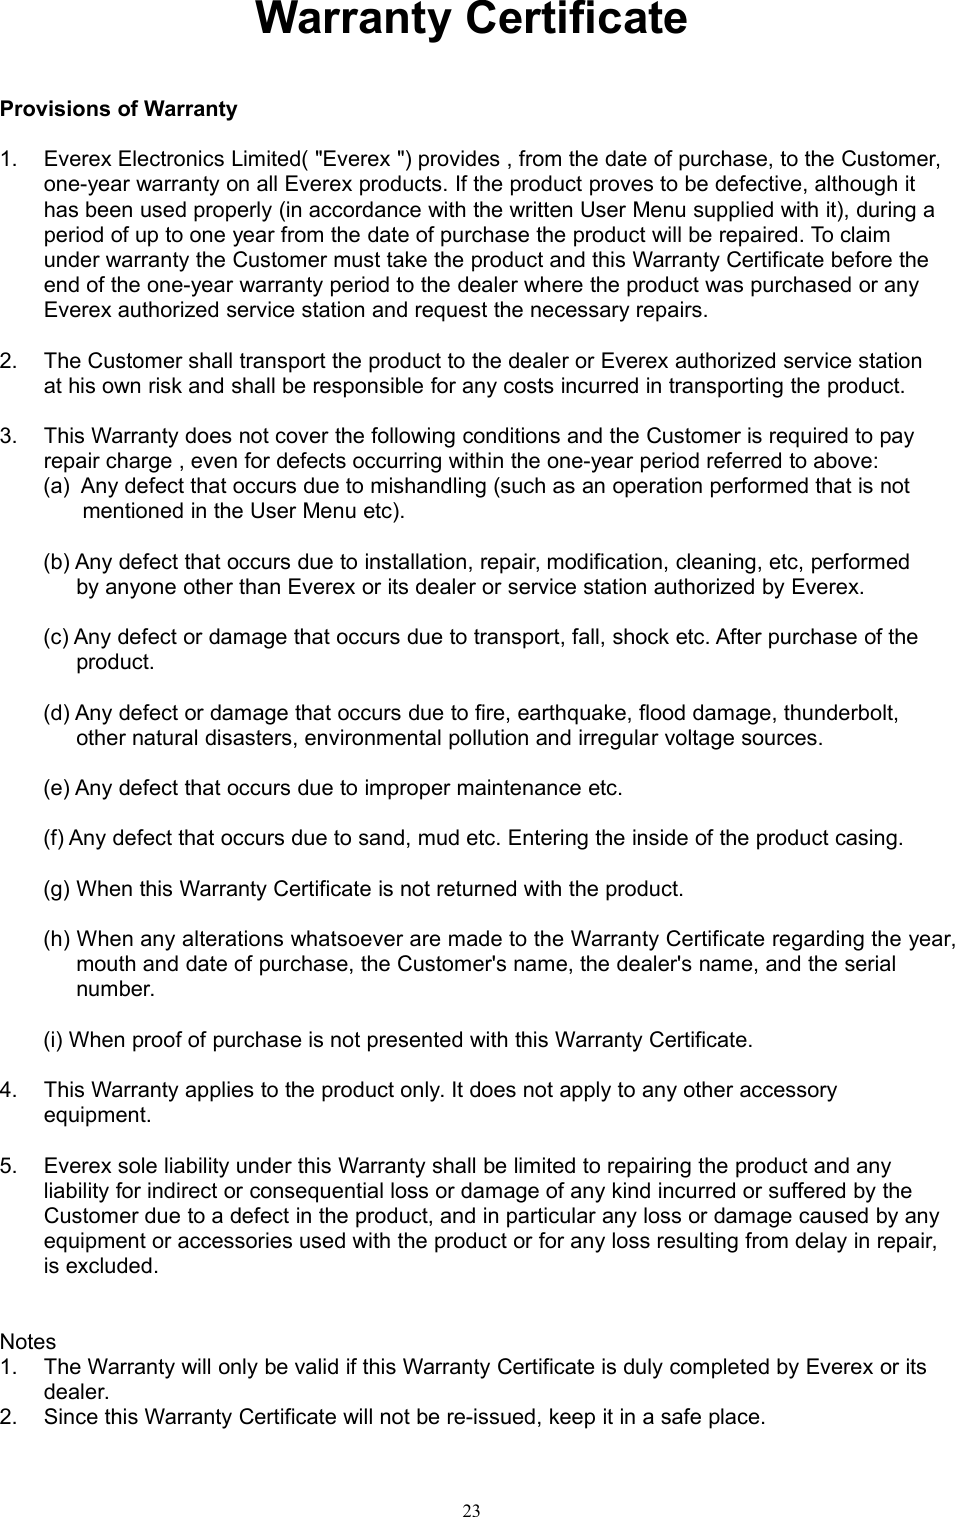 23Warranty CertificateProvisions of Warranty1. Everex Electronics Limited( &quot;Everex &quot;) provides , from the date of purchase, to the Customer,one-year warranty on all Everex products. If the product proves to be defective, although ithas been used properly (in accordance with the written User Menu supplied with it), during aperiod of up to one year from the date of purchase the product will be repaired. To claimunder warranty the Customer must take the product and this Warranty Certificate before theend of the one-year warranty period to the dealer where the product was purchased or anyEverex authorized service station and request the necessary repairs.2. The Customer shall transport the product to the dealer or Everex authorized service stationat his own risk and shall be responsible for any costs incurred in transporting the product.3. This Warranty does not cover the following conditions and the Customer is required to payrepair charge , even for defects occurring within the one-year period referred to above:(a) Any defect that occurs due to mishandling (such as an operation performed that is notmentioned in the User Menu etc).(b) Any defect that occurs due to installation, repair, modification, cleaning, etc, performedby anyone other than Everex or its dealer or service station authorized by Everex.(c) Any defect or damage that occurs due to transport, fall, shock etc. After purchase of theproduct.(d) Any defect or damage that occurs due to fire, earthquake, flood damage, thunderbolt,other natural disasters, environmental pollution and irregular voltage sources.(e) Any defect that occurs due to improper maintenance etc.(f) Any defect that occurs due to sand, mud etc. Entering the inside of the product casing.(g) When this Warranty Certificate is not returned with the product.(h) When any alterations whatsoever are made to the Warranty Certificate regarding the year,mouth and date of purchase, the Customer&apos;s name, the dealer&apos;s name, and the serialnumber.(i) When proof of purchase is not presented with this Warranty Certificate.4. This Warranty applies to the product only. It does not apply to any other accessoryequipment.5. Everex sole liability under this Warranty shall be limited to repairing the product and anyliability for indirect or consequential loss or damage of any kind incurred or suffered by theCustomer due to a defect in the product, and in particular any loss or damage caused by anyequipment or accessories used with the product or for any loss resulting from delay in repair,is excluded.Notes1. The Warranty will only be valid if this Warranty Certificate is duly completed by Everex or itsdealer.2. Since this Warranty Certificate will not be re-issued, keep it in a safe place.